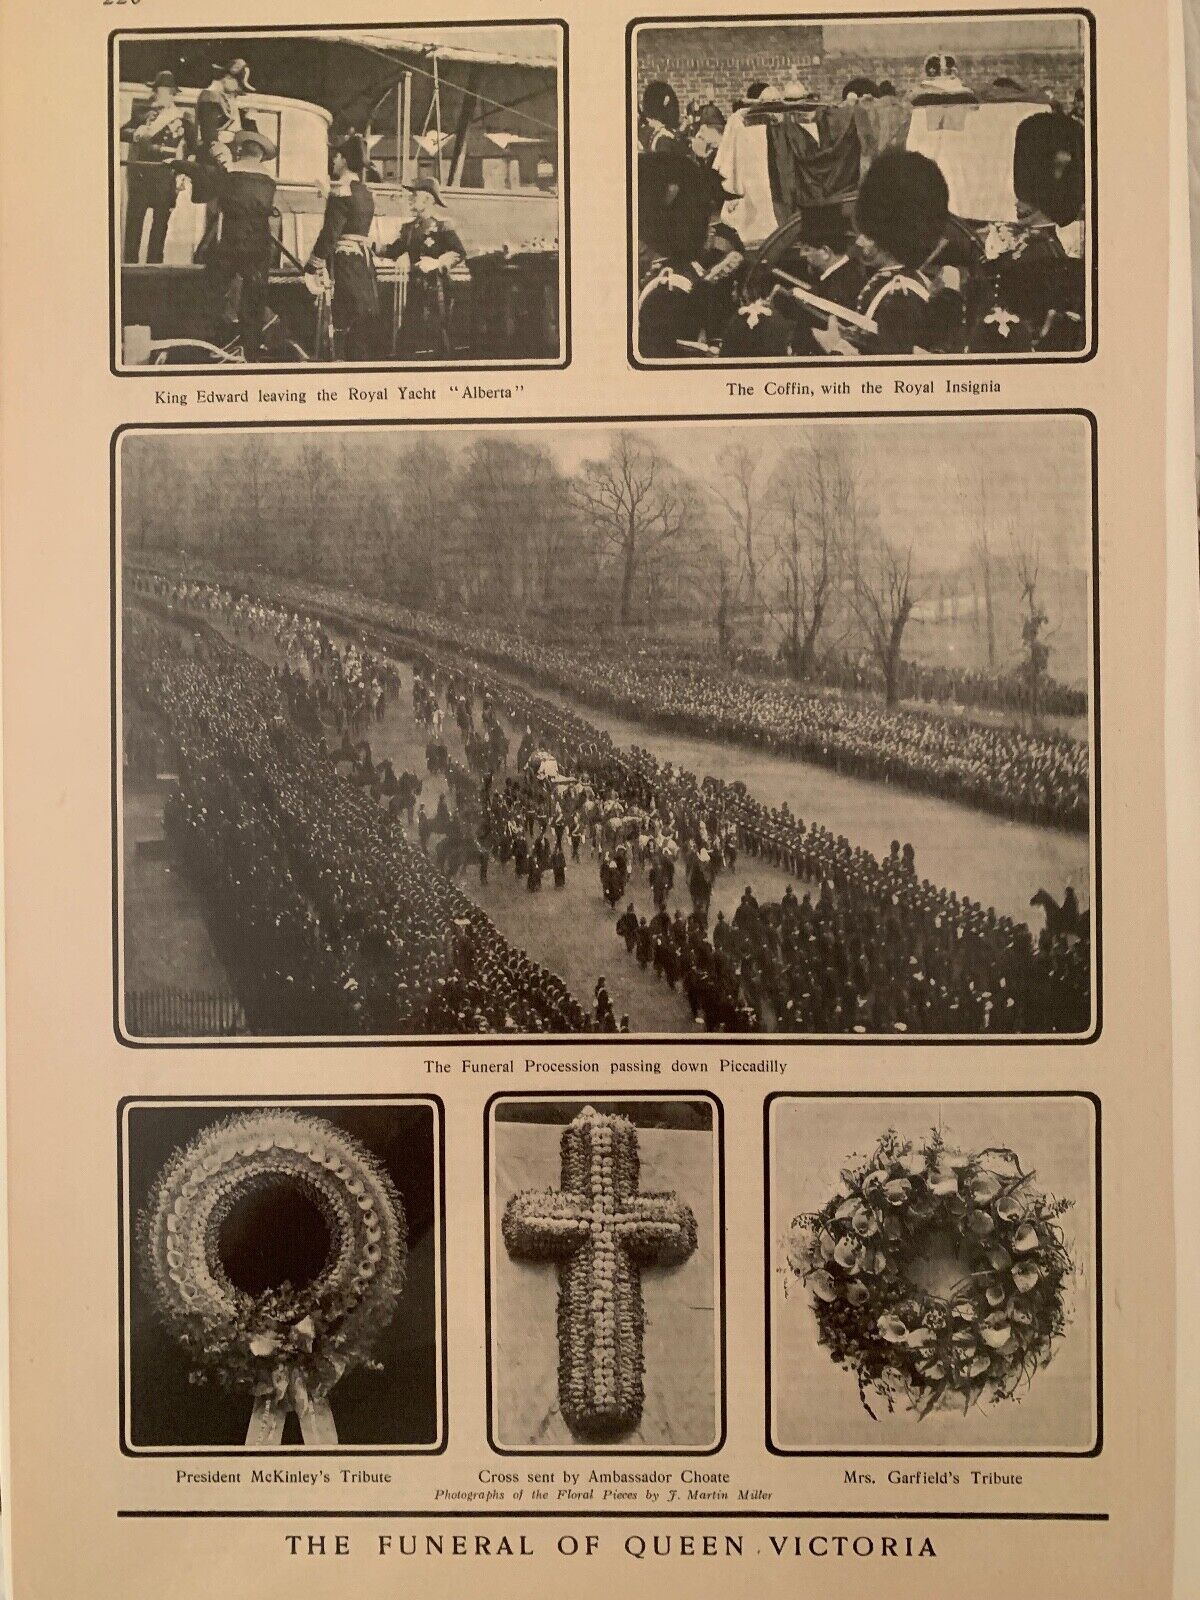 Queen Victoria's Funeral Procession, Harper's Weekly, 1901, Rare images 